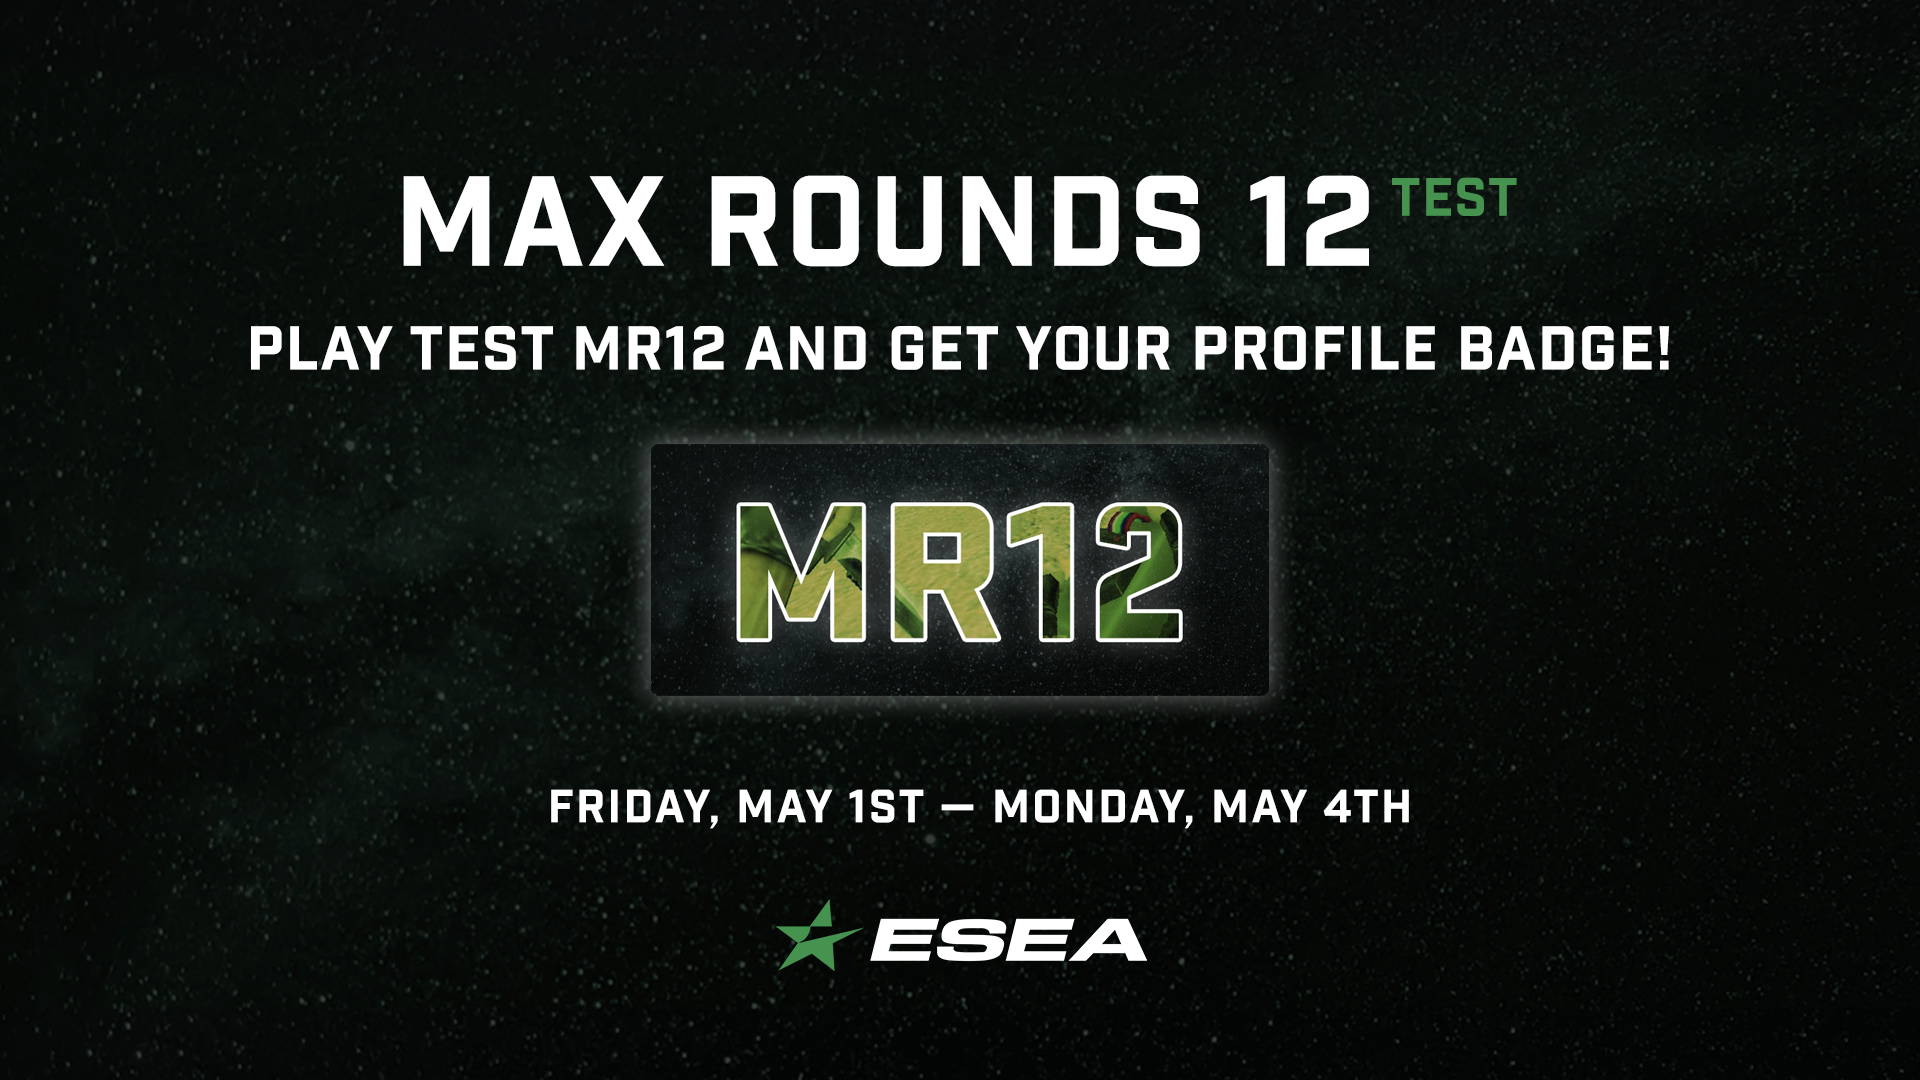 Max Rounds 12: A blast from the past!